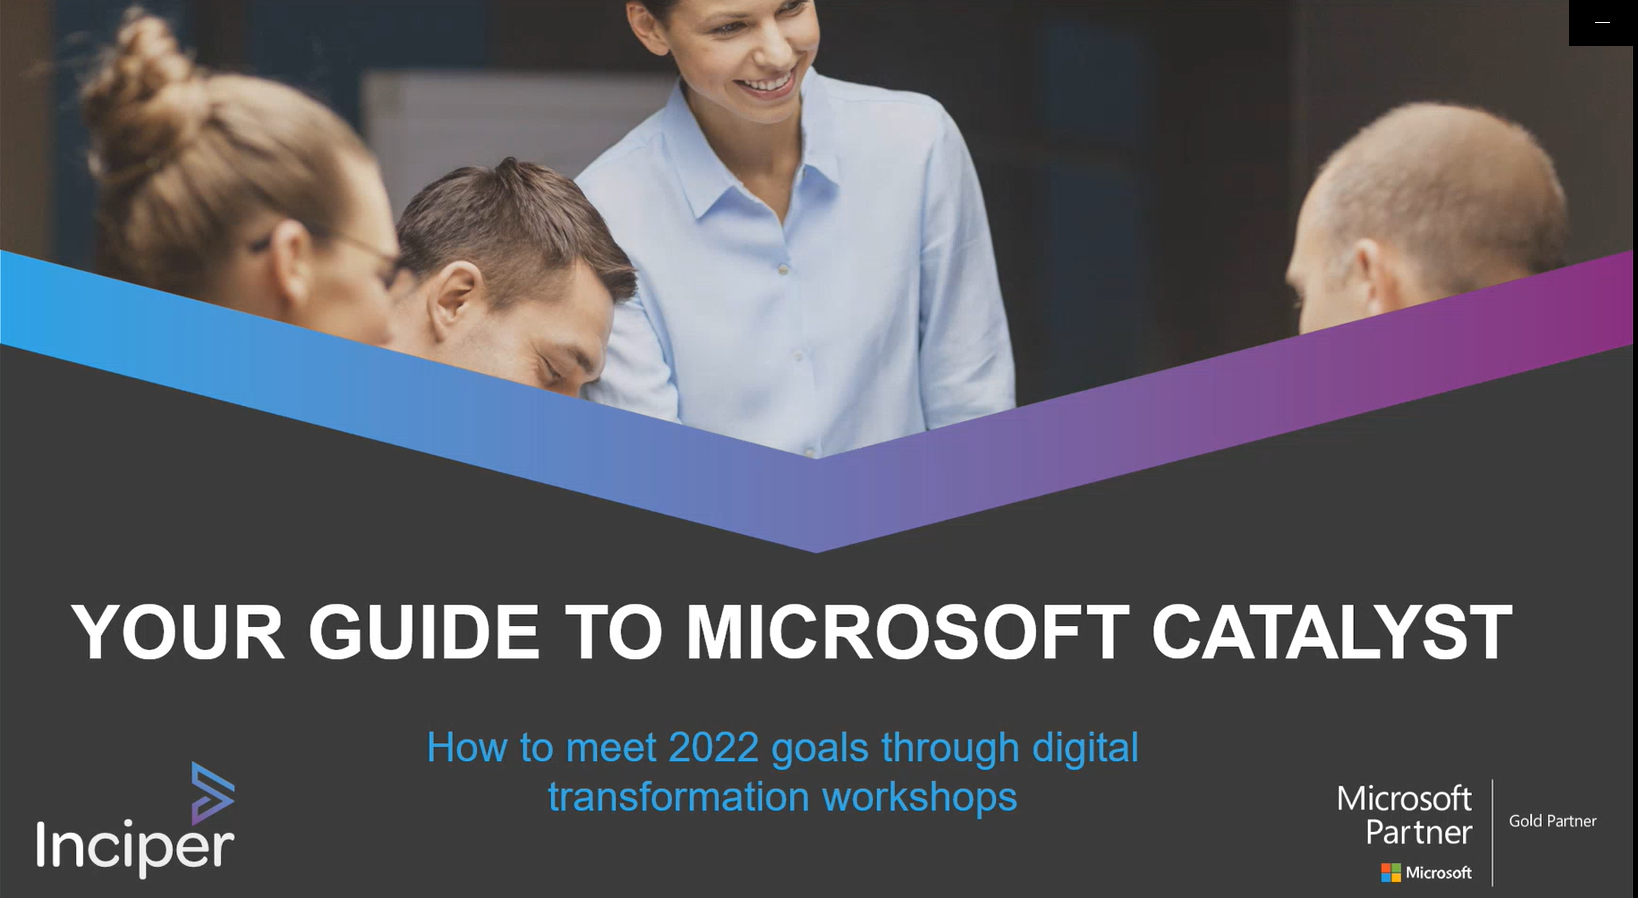 Your guide to Microsoft Catalyst – how to meet 2022 goals through digital transformation workshops